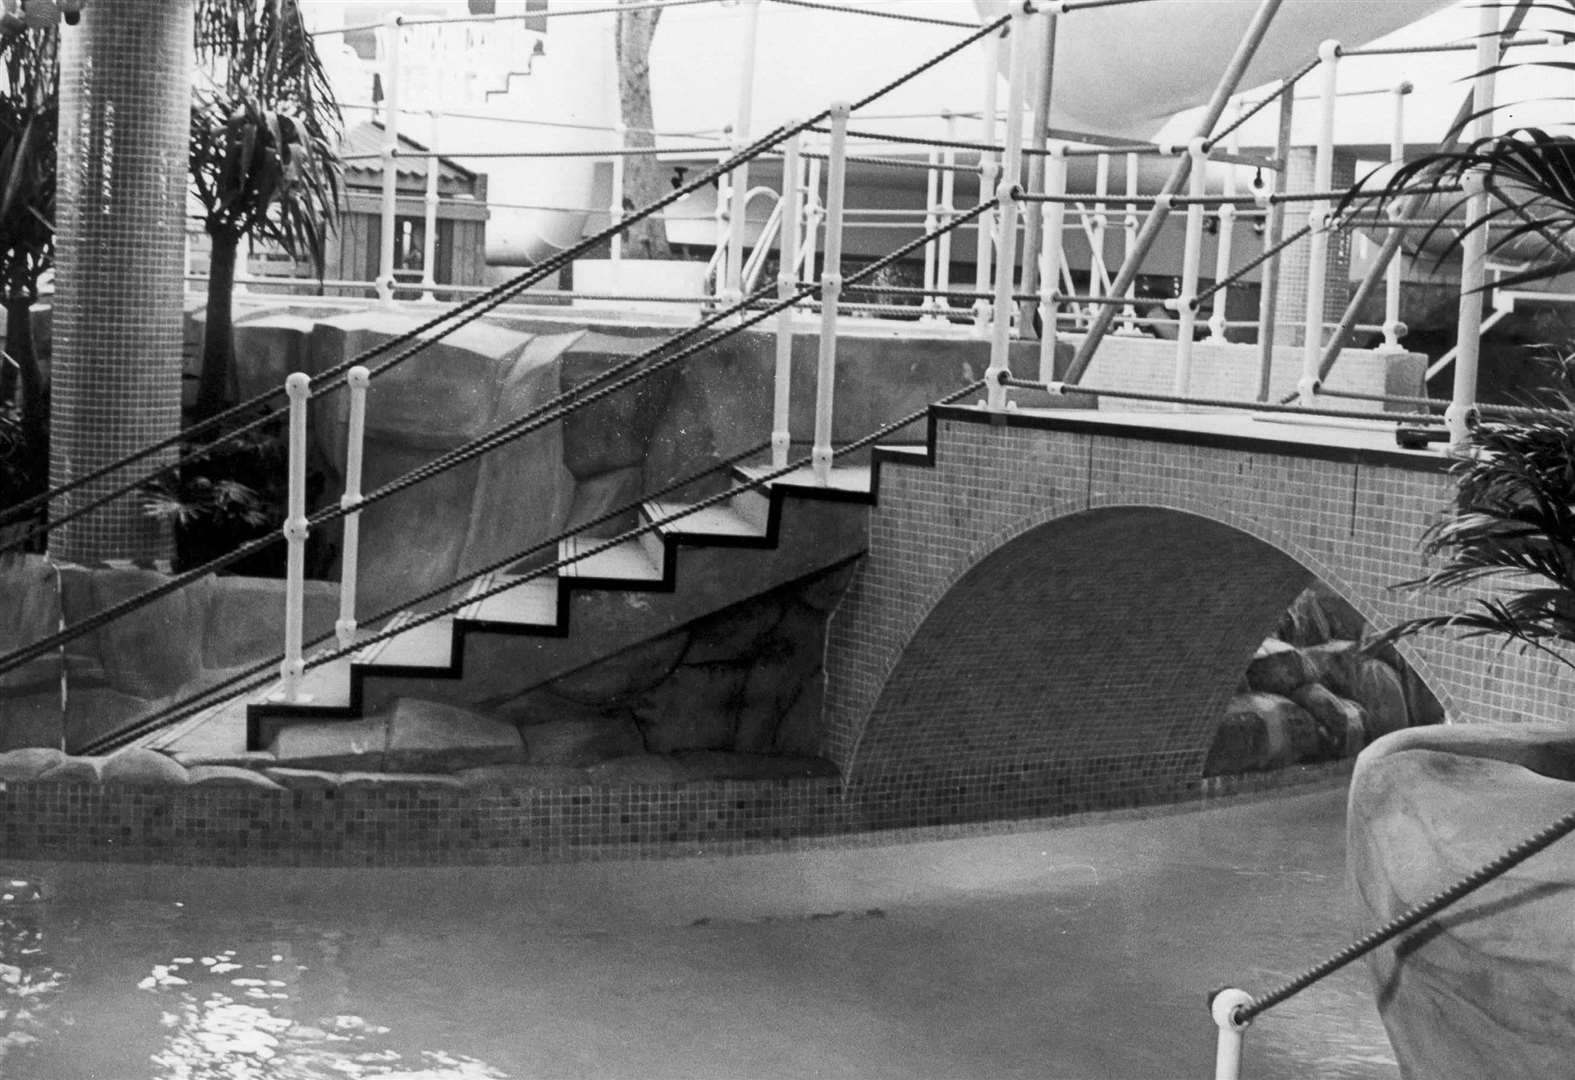 One of the inside pools of the Fantaseas Water Park, taken in 1989